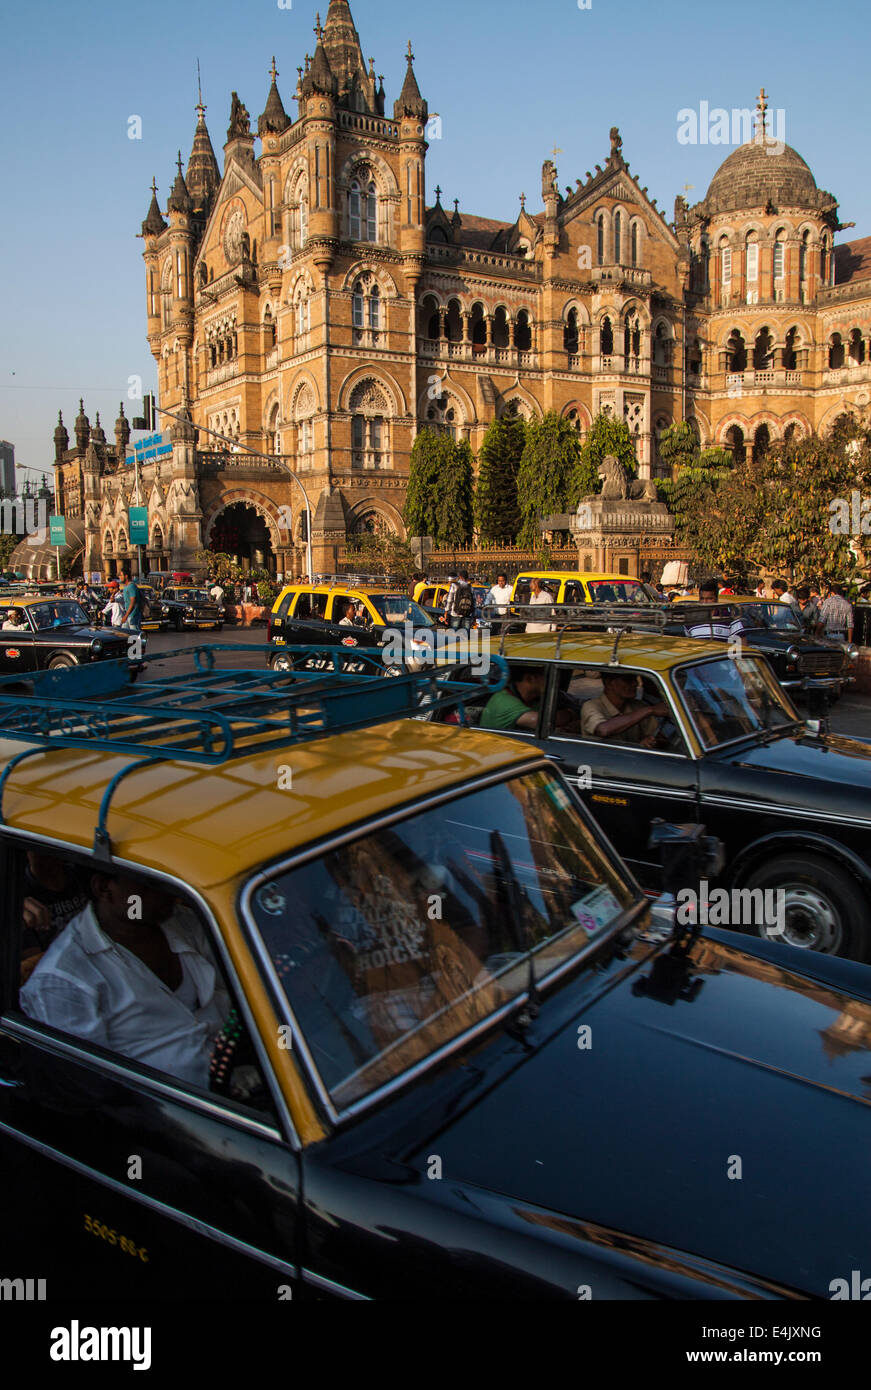 Taxi in front of Victoria Terminus train station in Mumbai Stock Photo